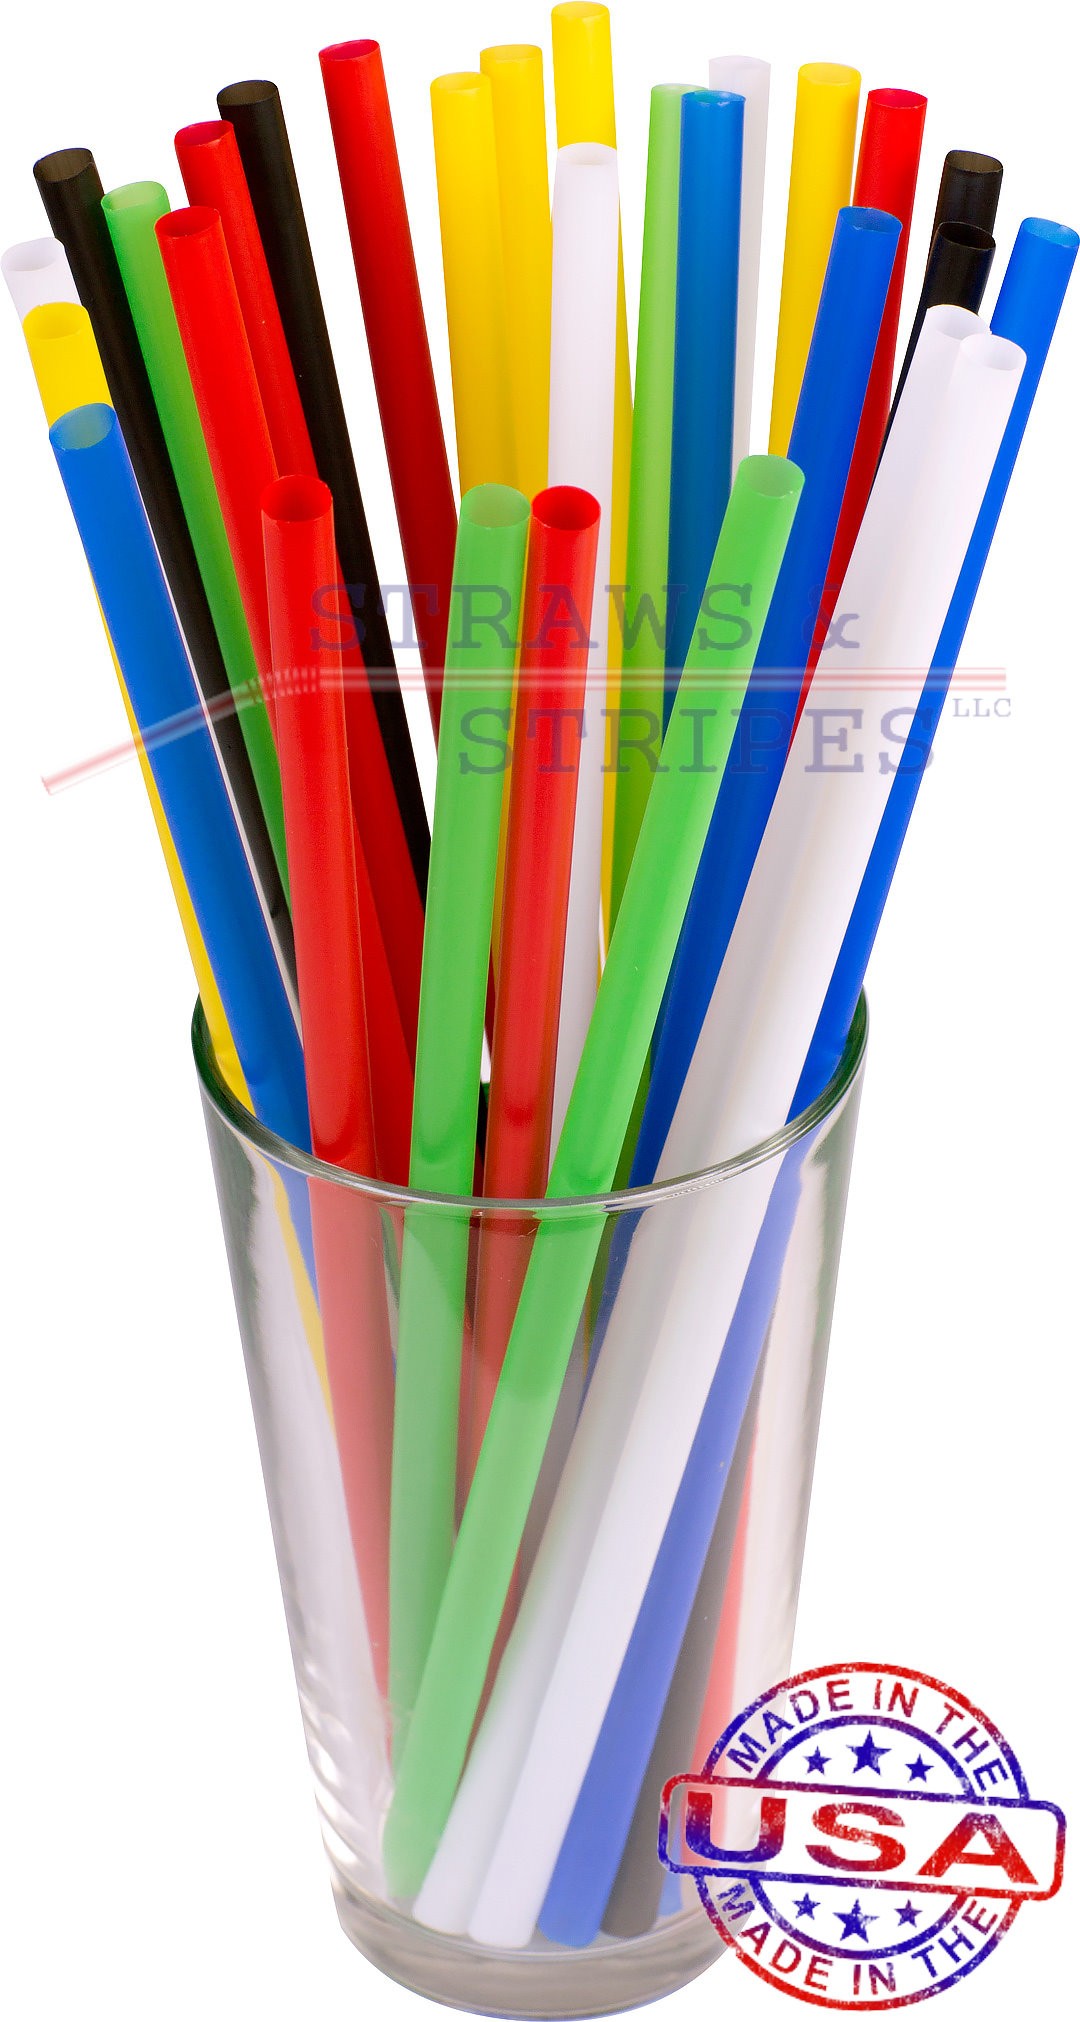 We are a drinking straw manufacture here in the USA (FLORIDA) GIANT ...